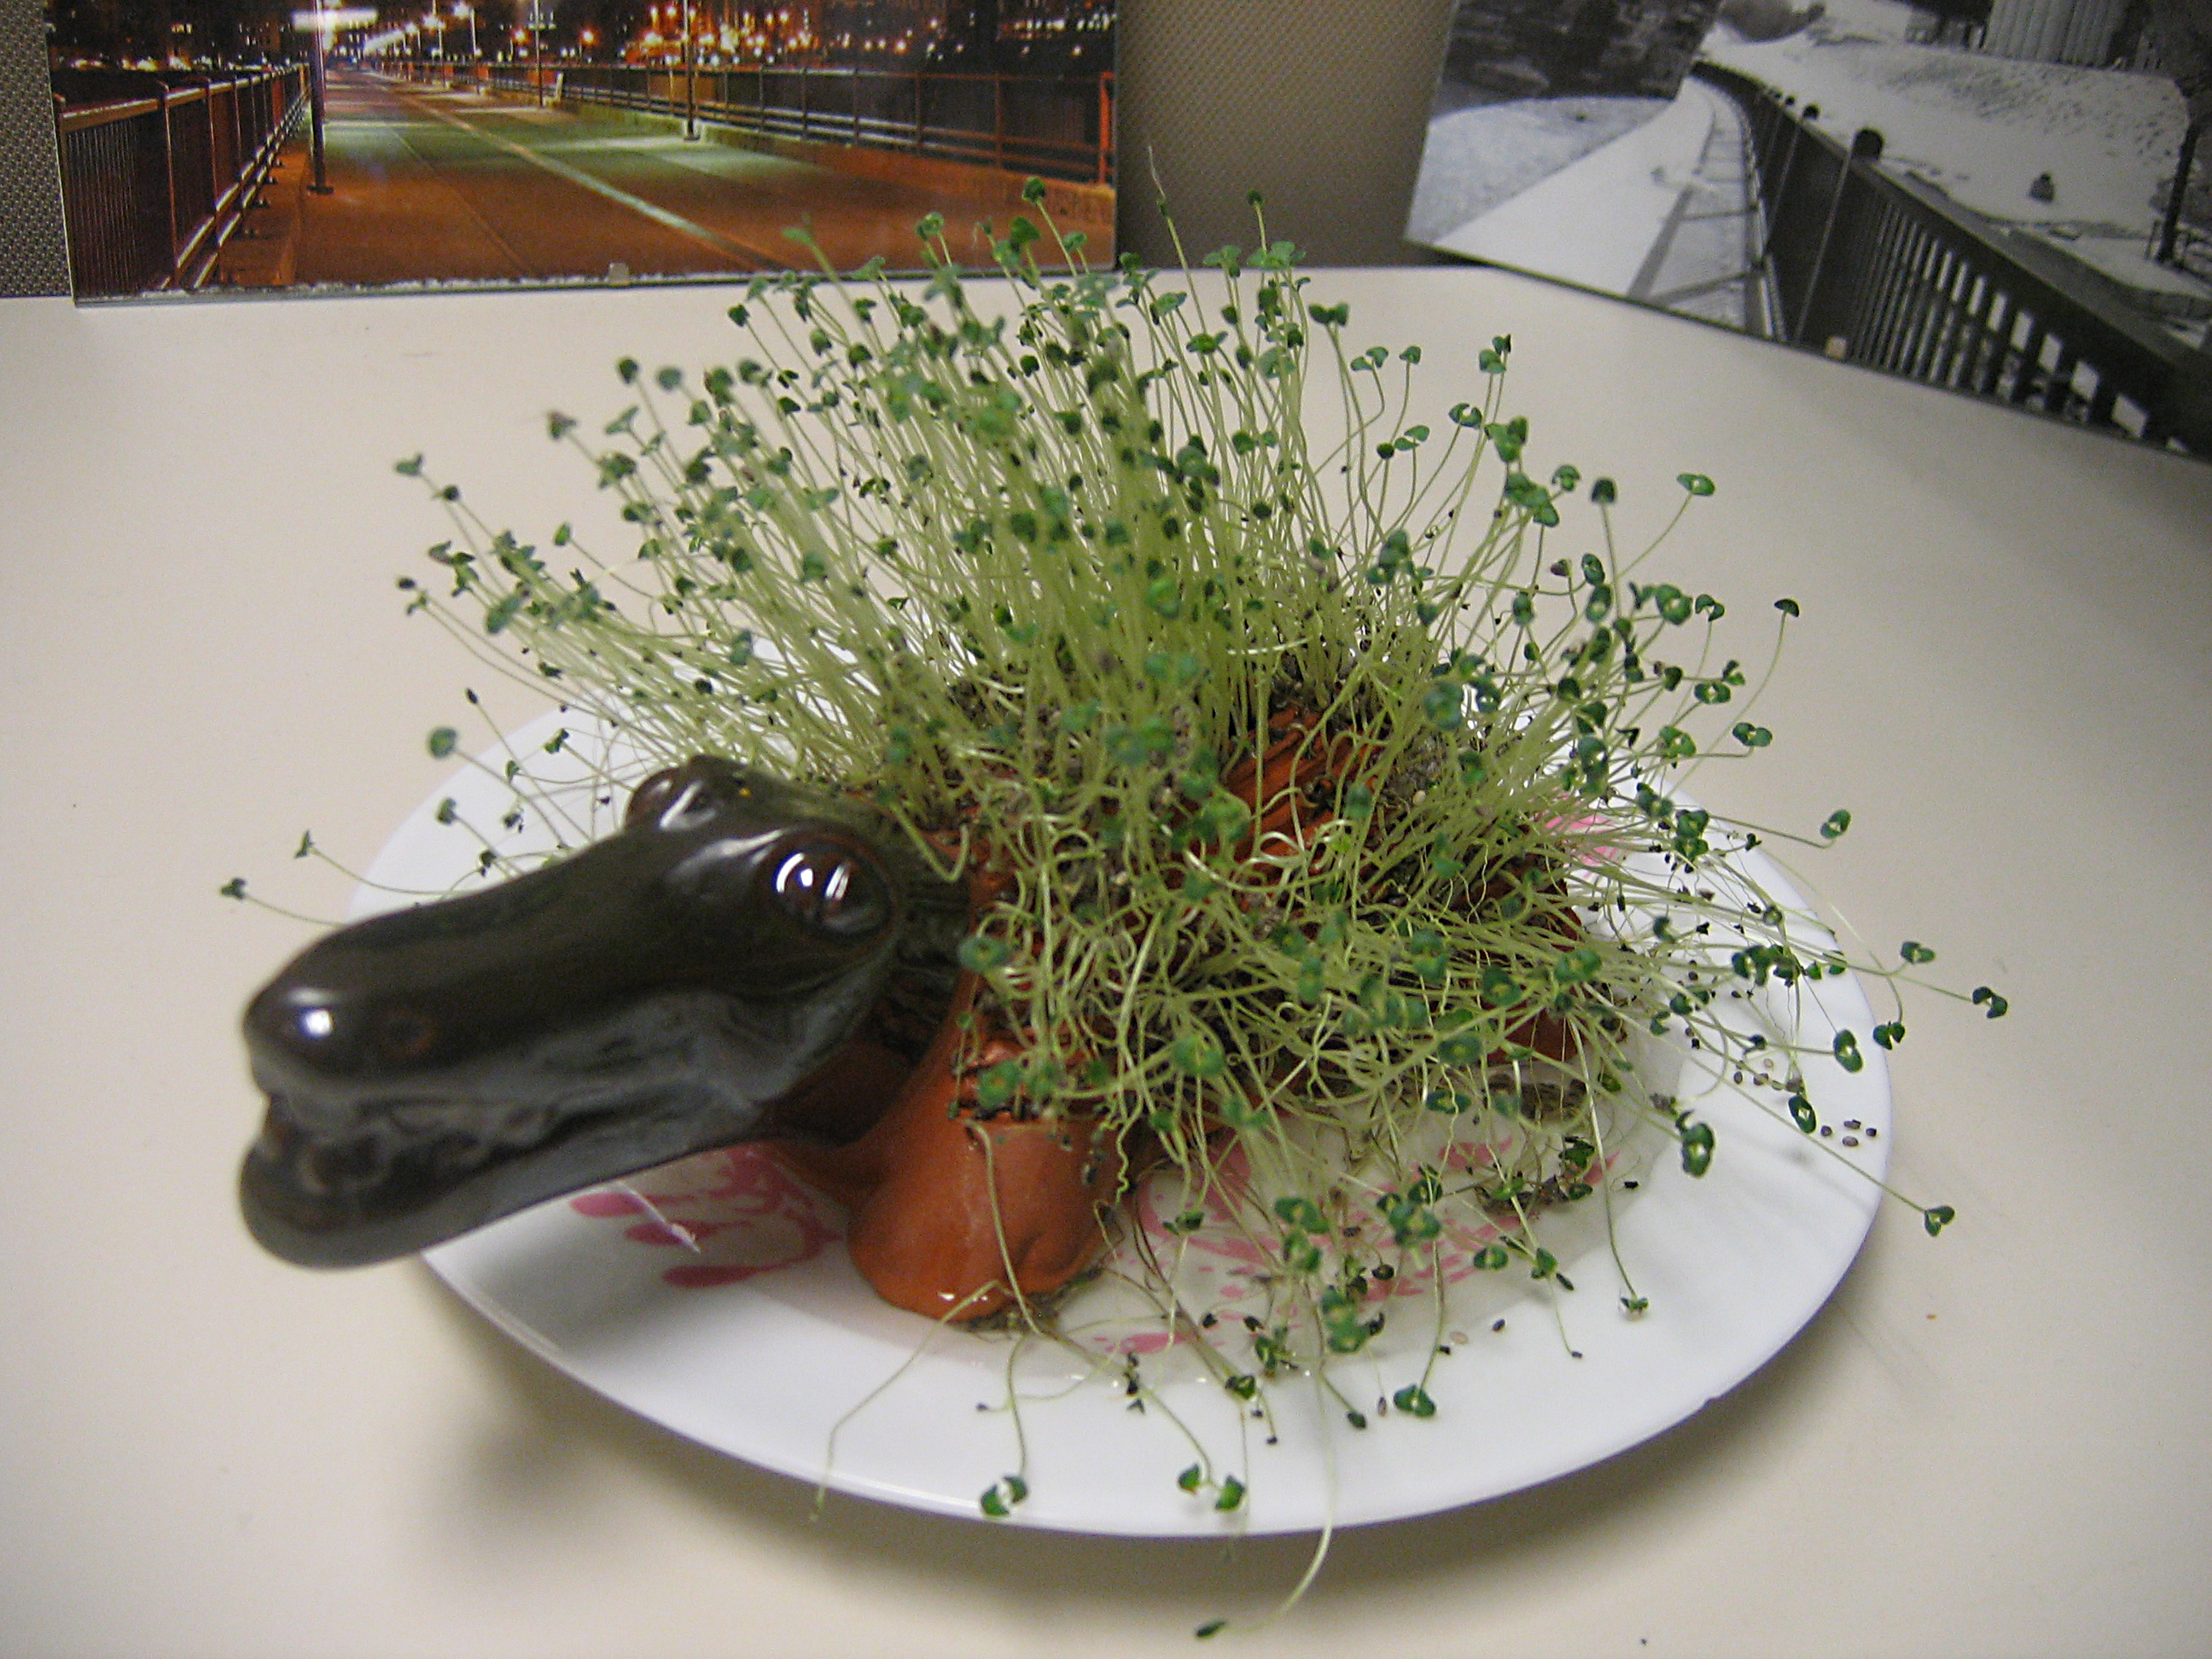 A chia pet shaped like an alligator, with sprouts growing all over.